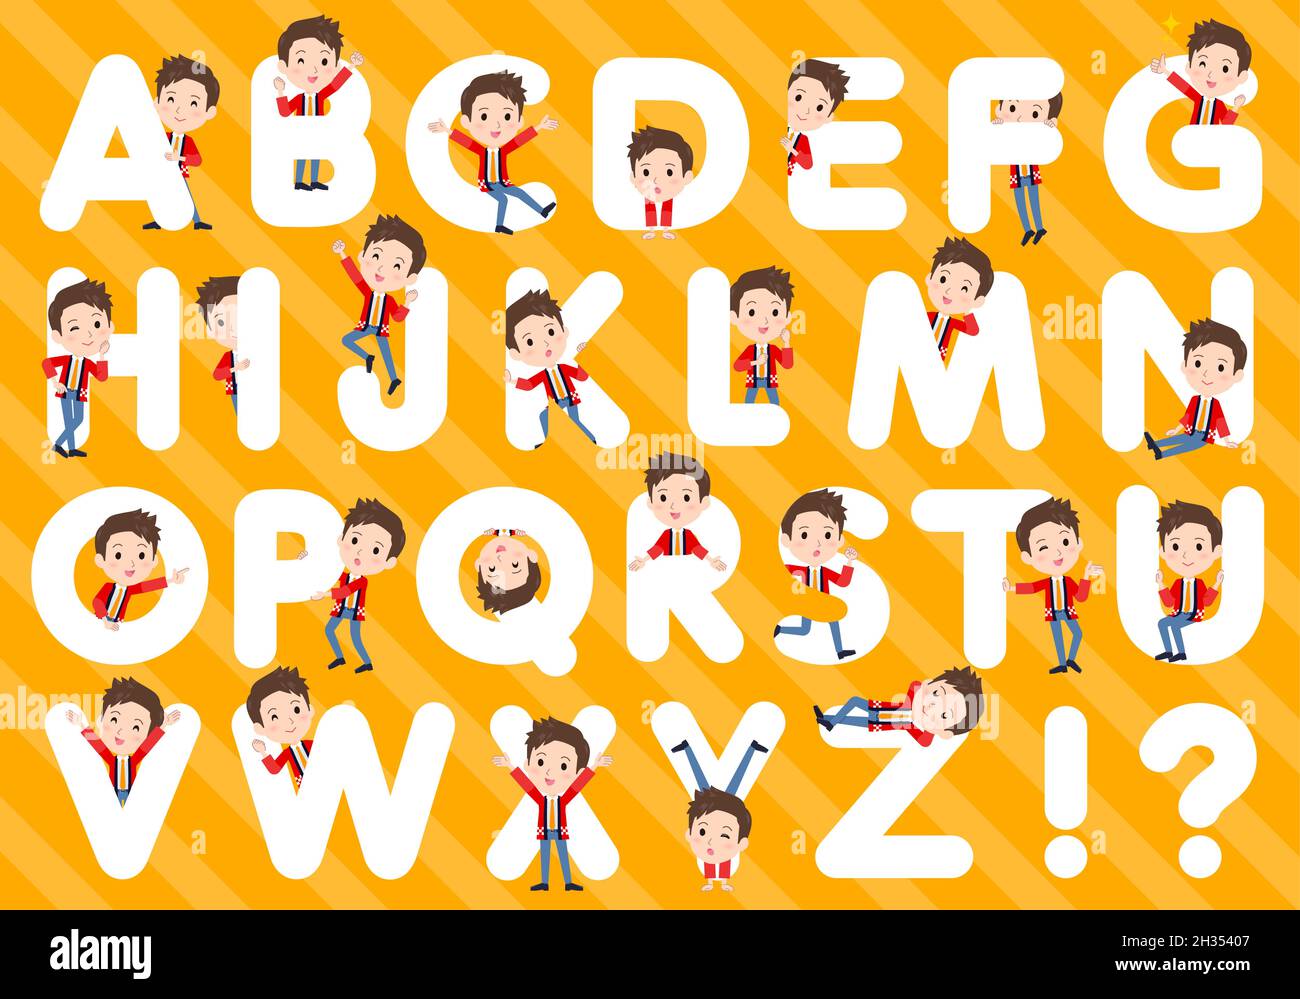 A set of wearing a happi coat man designed with alphabet.It's vector art so easy to edit. Stock Vector